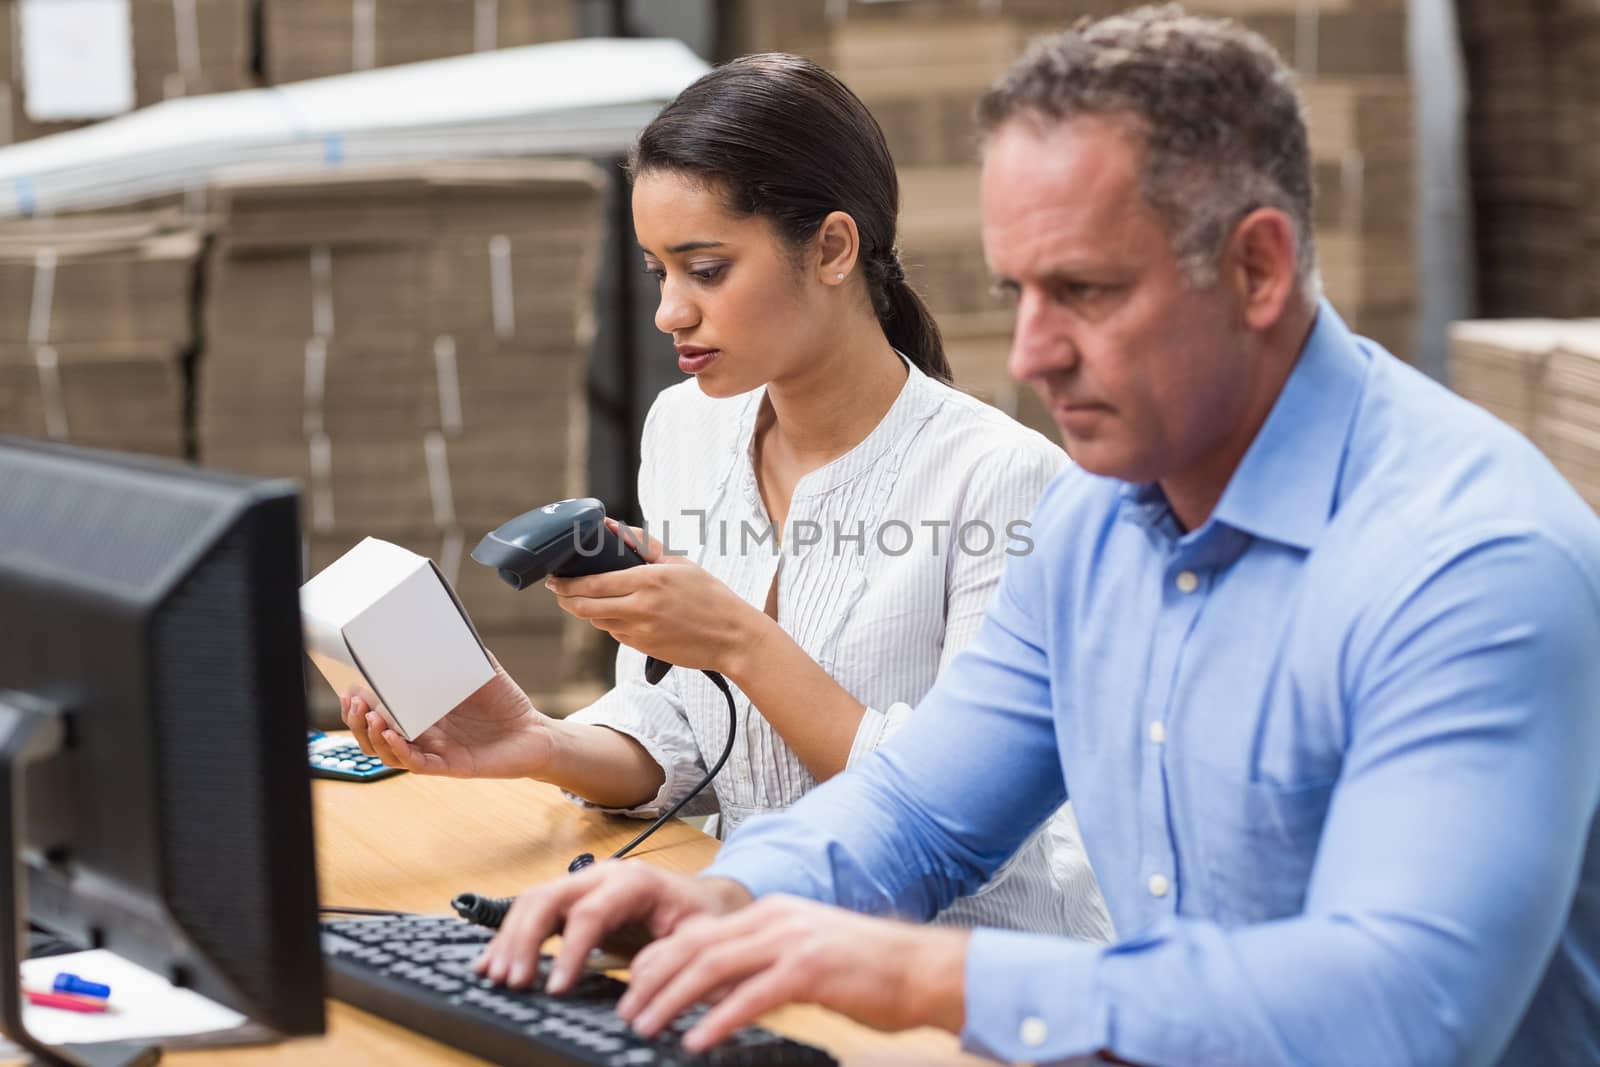 Manager scanning box while her colleague typing on laptop in a large warehouse